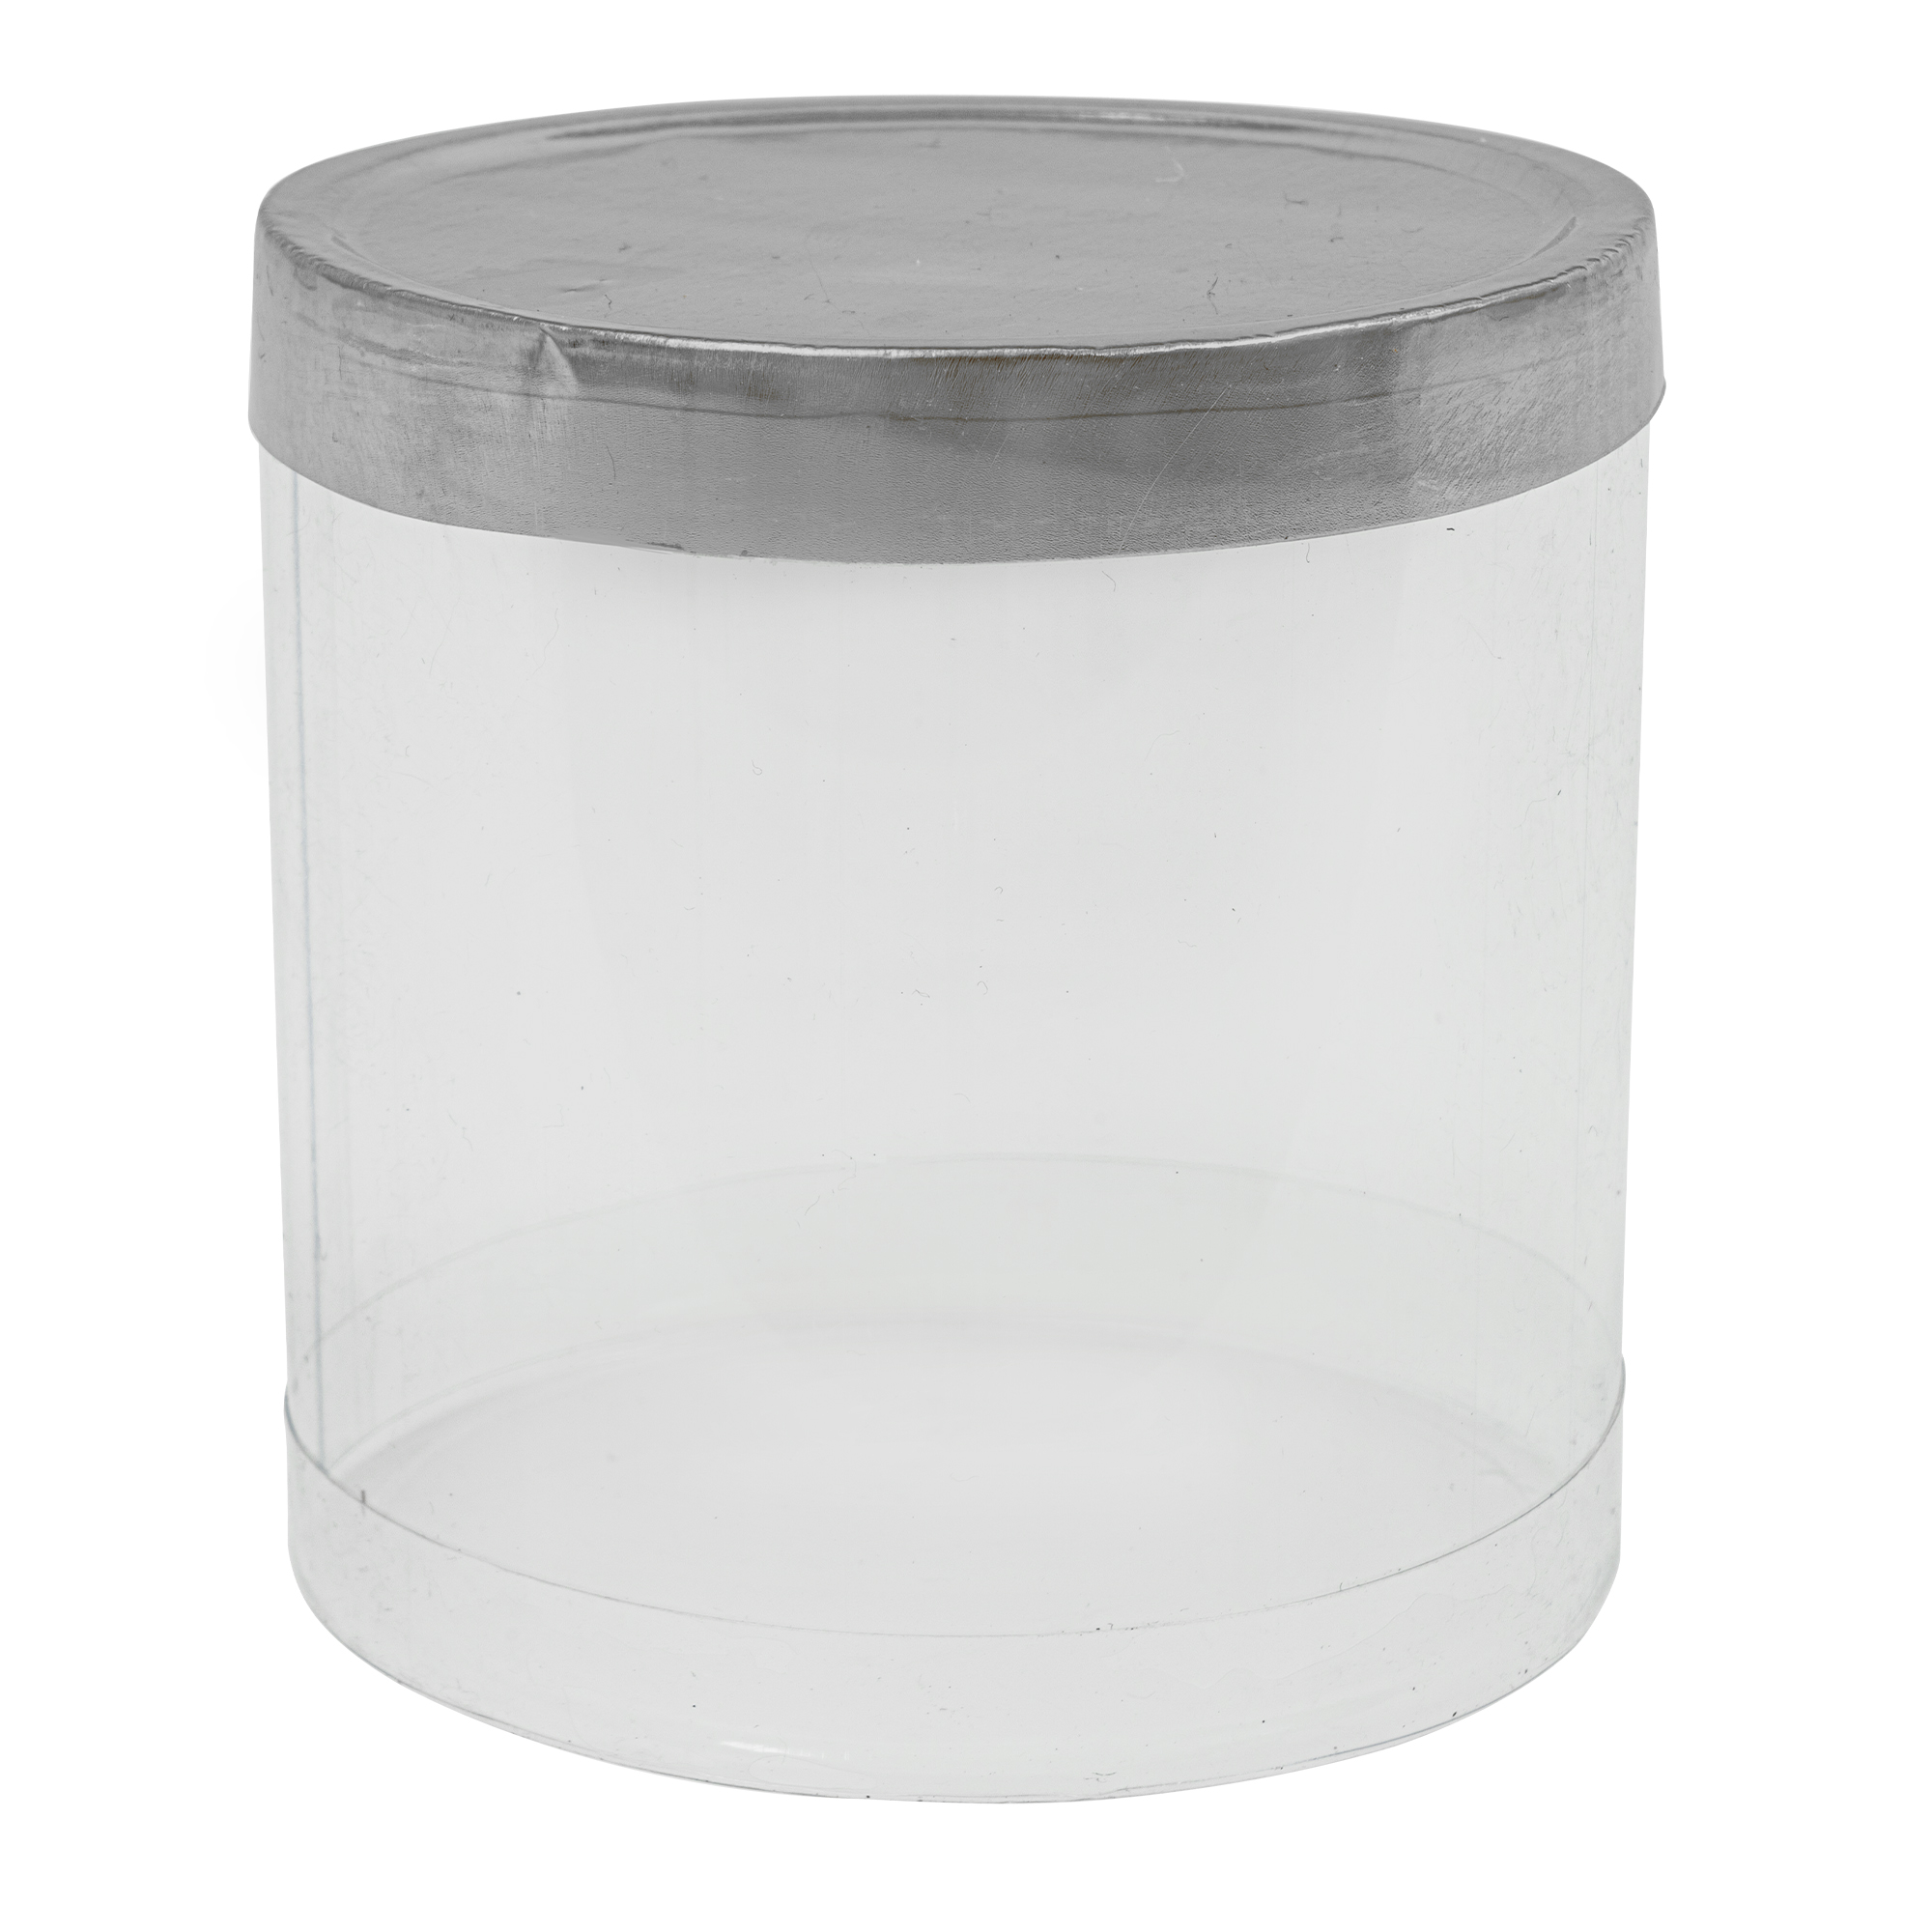 Cylinder PVC Container 4" 6pc/pack - Silver